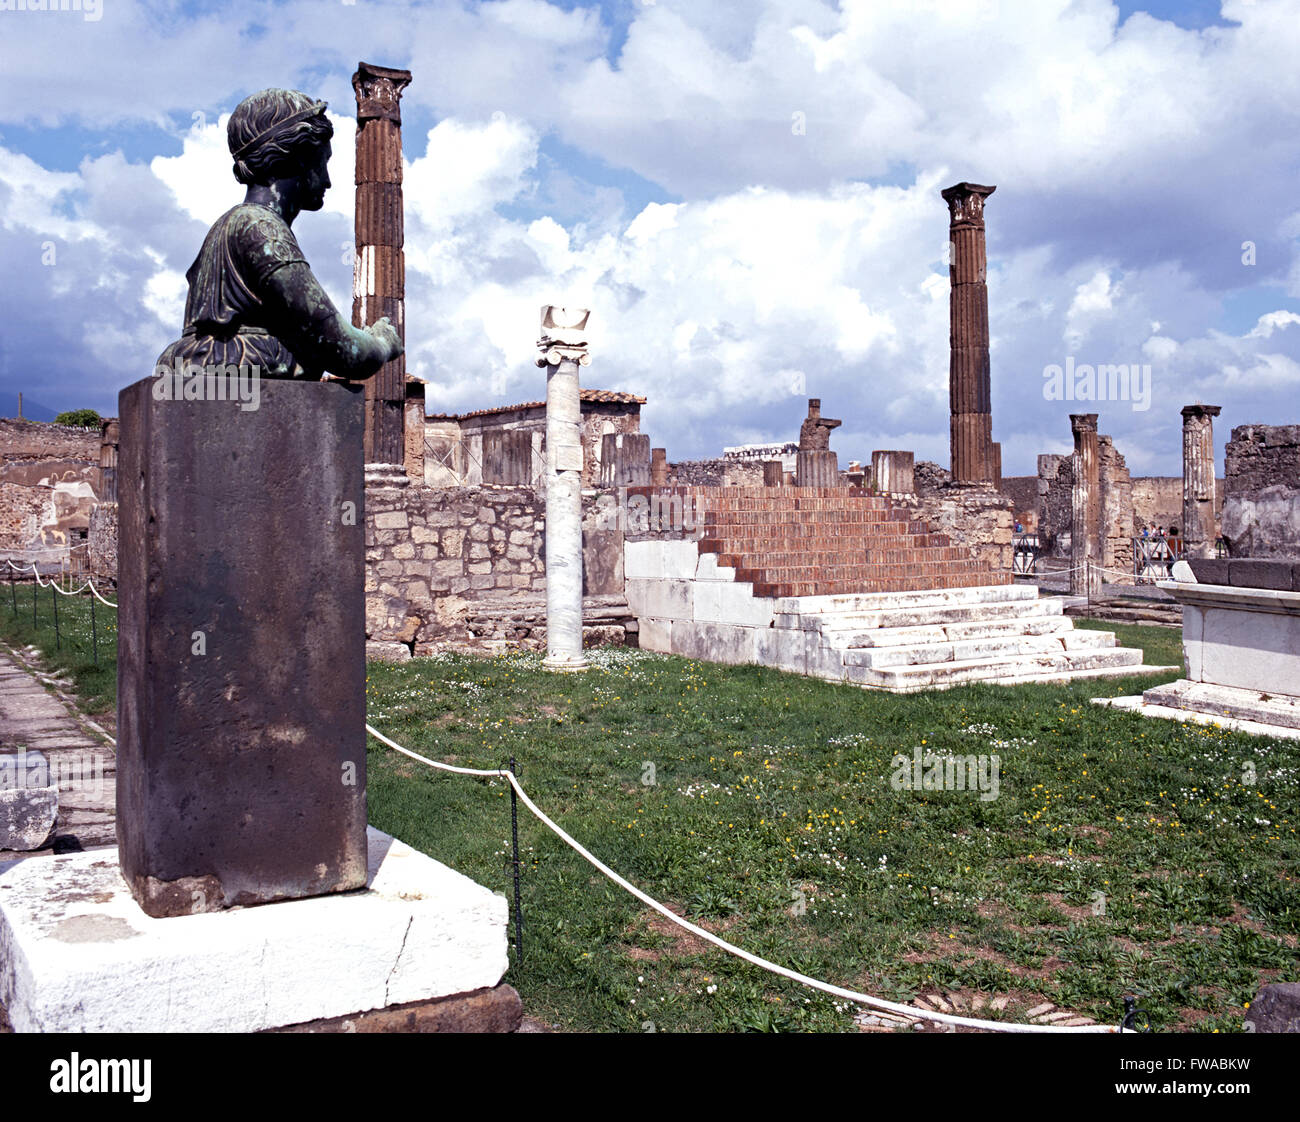 View of the Temple of Apollo with a statue in the foreground, Pompeii, Campania, Italy, Europe. Stock Photo